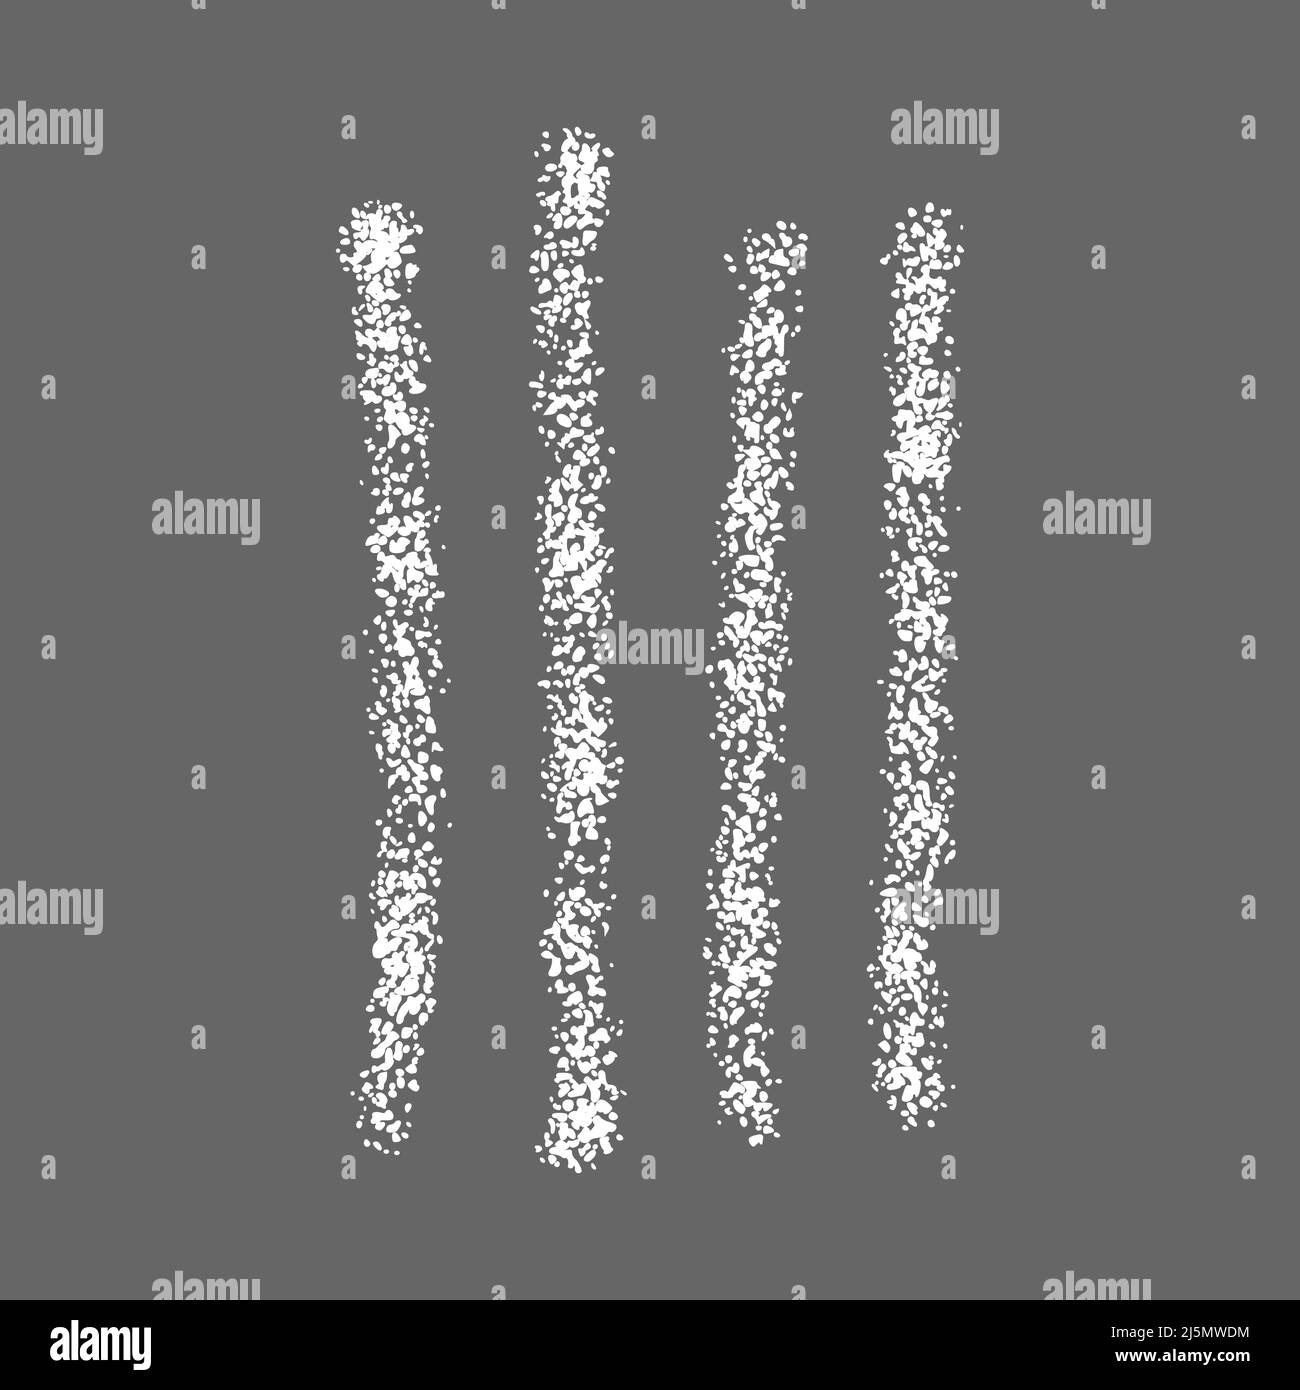 Chalk drawn tally mark symbolized number 4 on gray background. Four white hand drawn sticks, cunting stripes on chalkboard. Unary numeral system sign. Vector realistic illustration Stock Vector